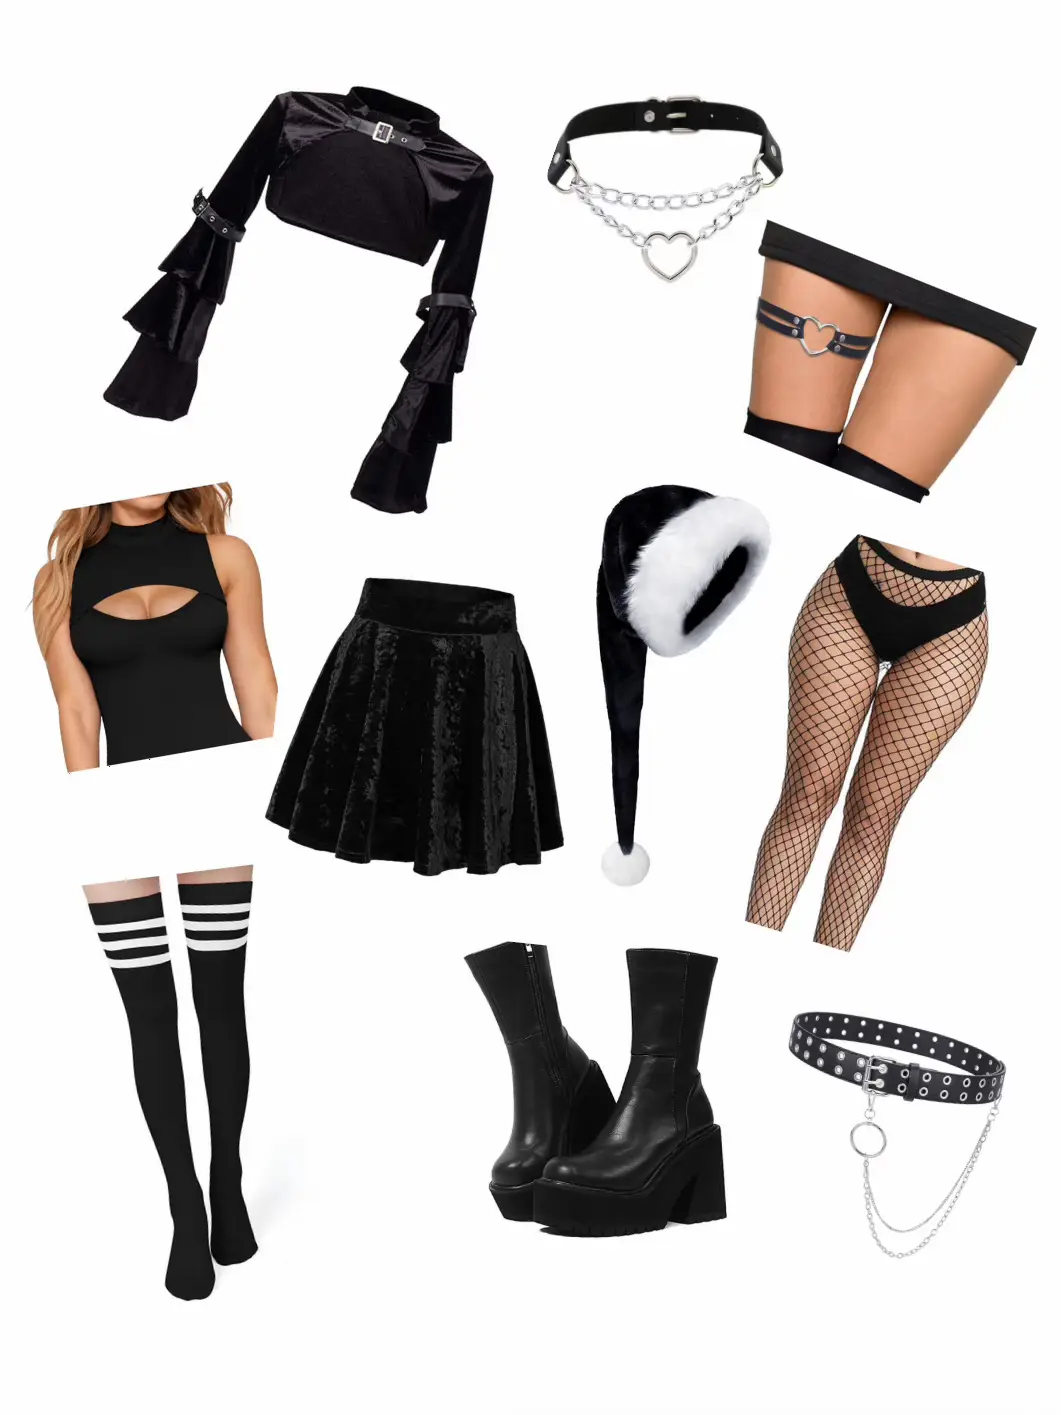 Goth Girl Fashion Clothing Outfit Ideas for Inspiration : r/GothGirlClothing